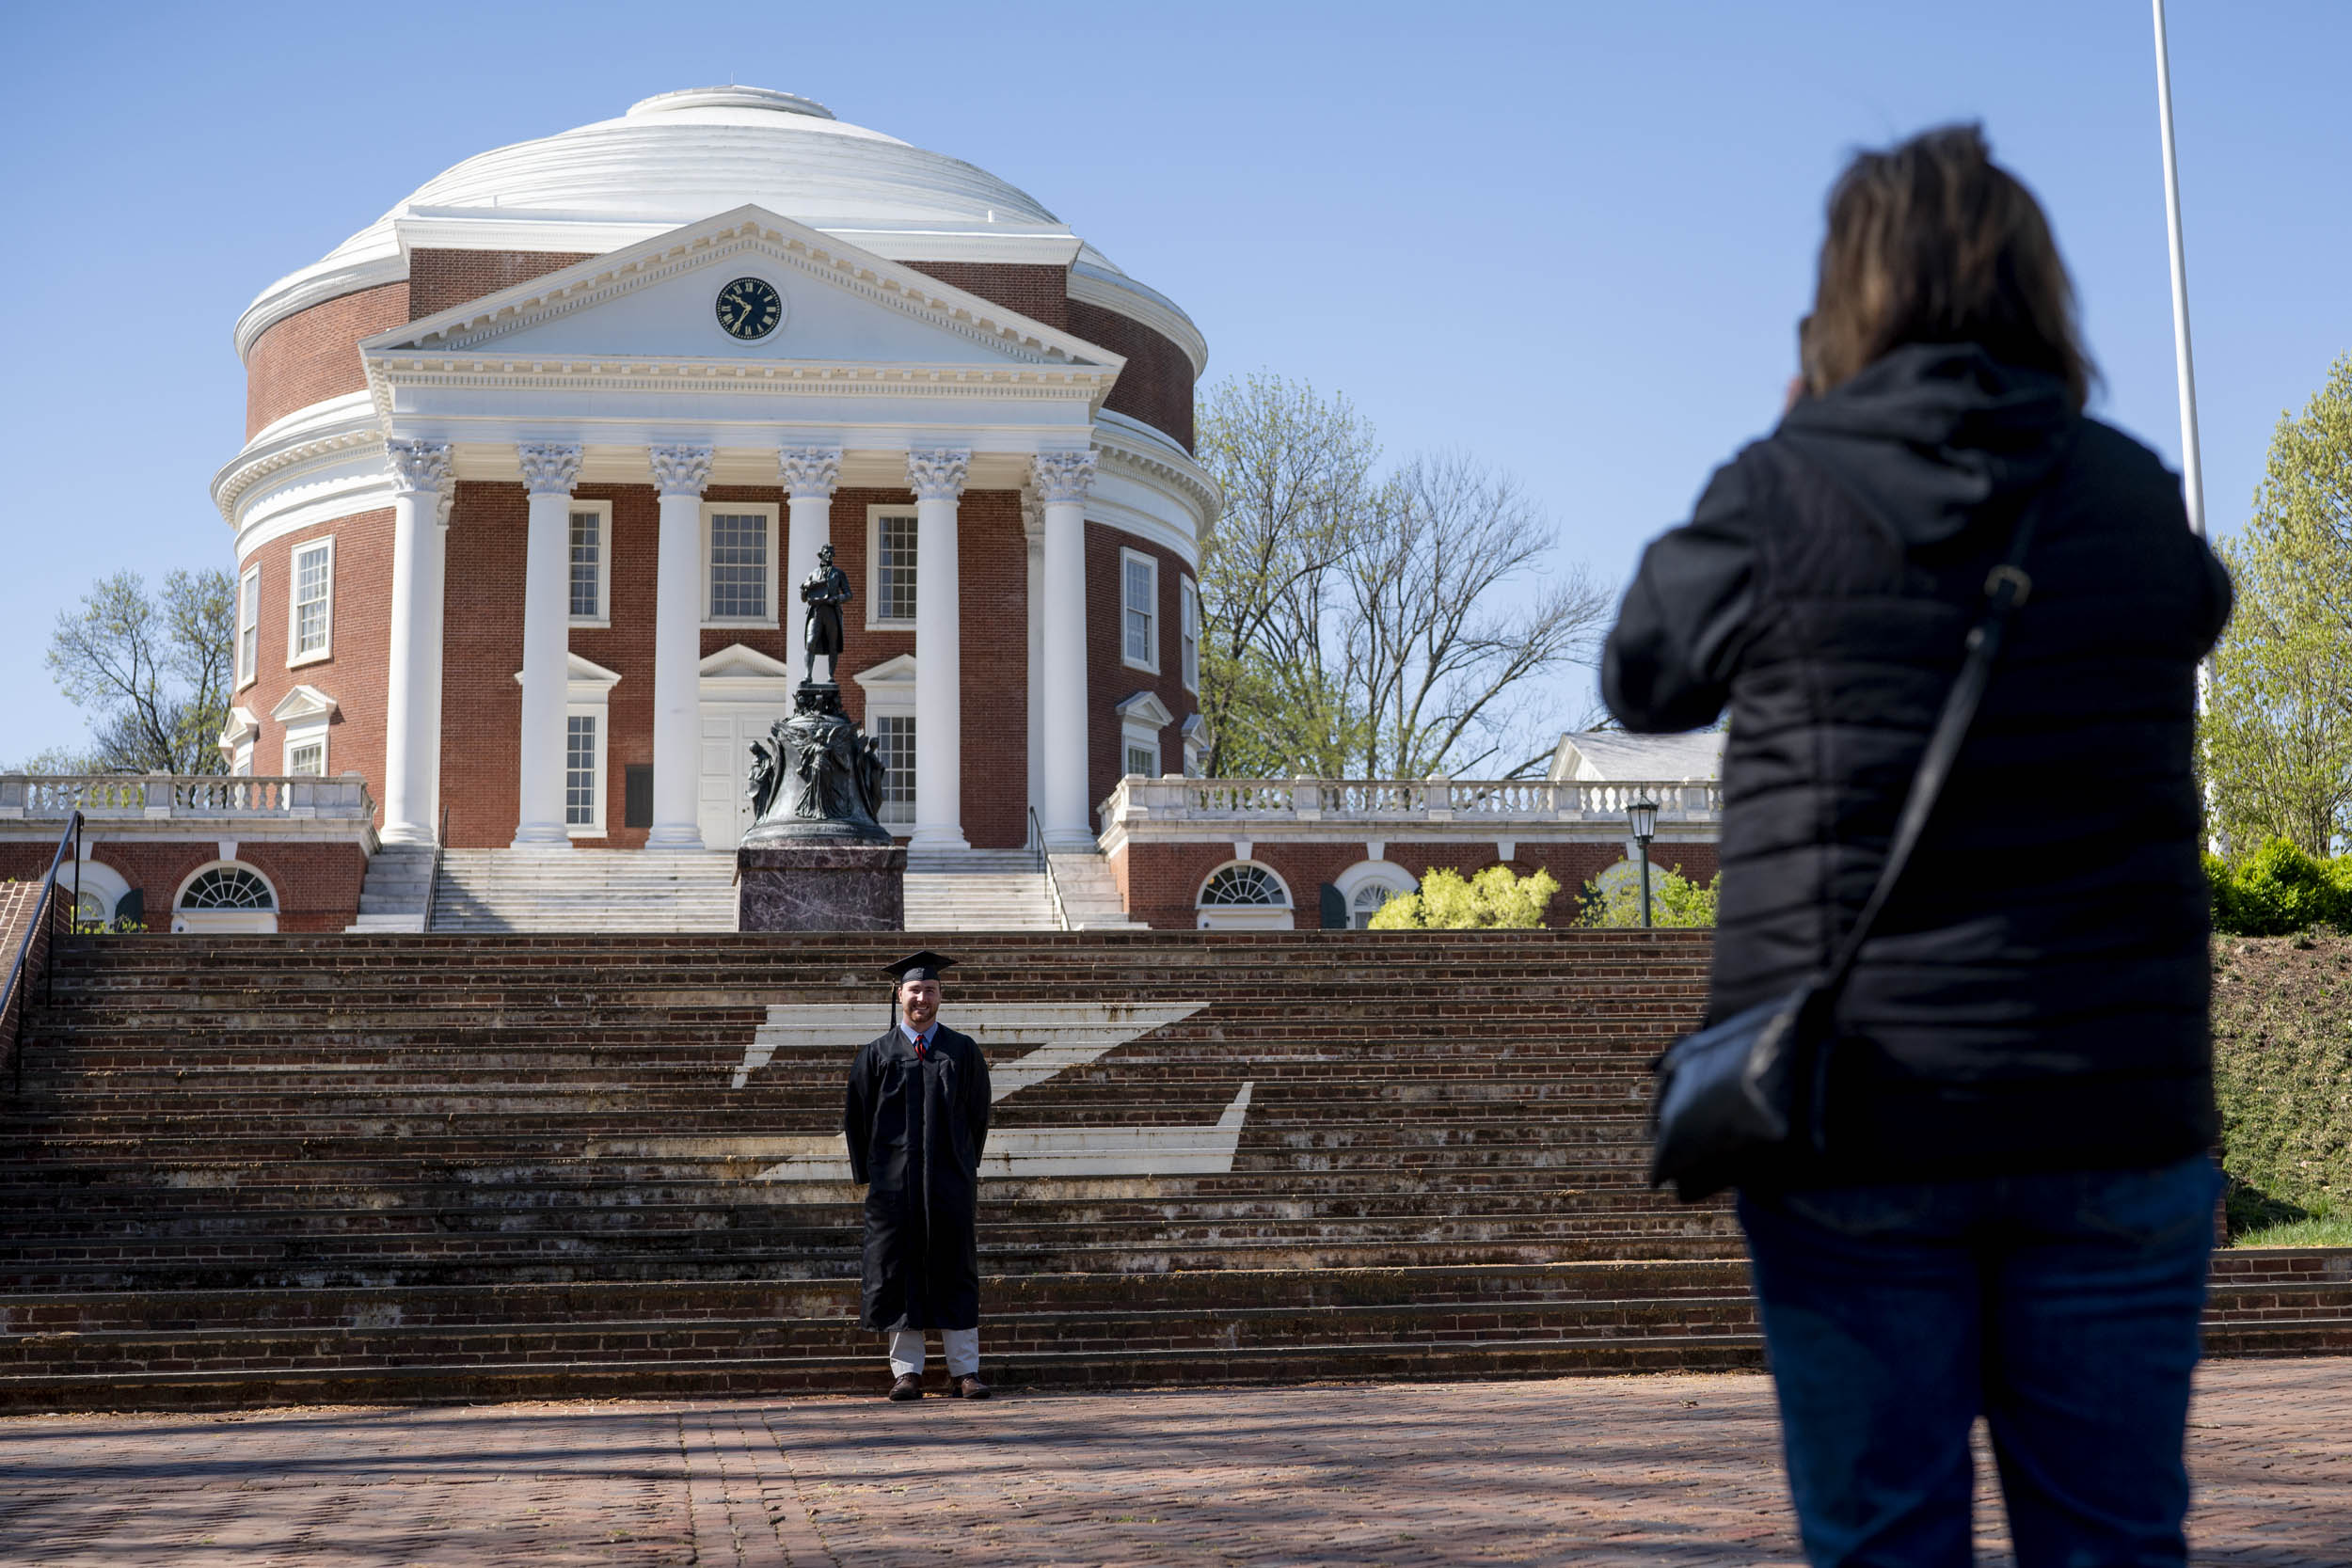 Mom taking a picture of her son as they stand in front of the Rotunda and Thomas Jeffersons statue